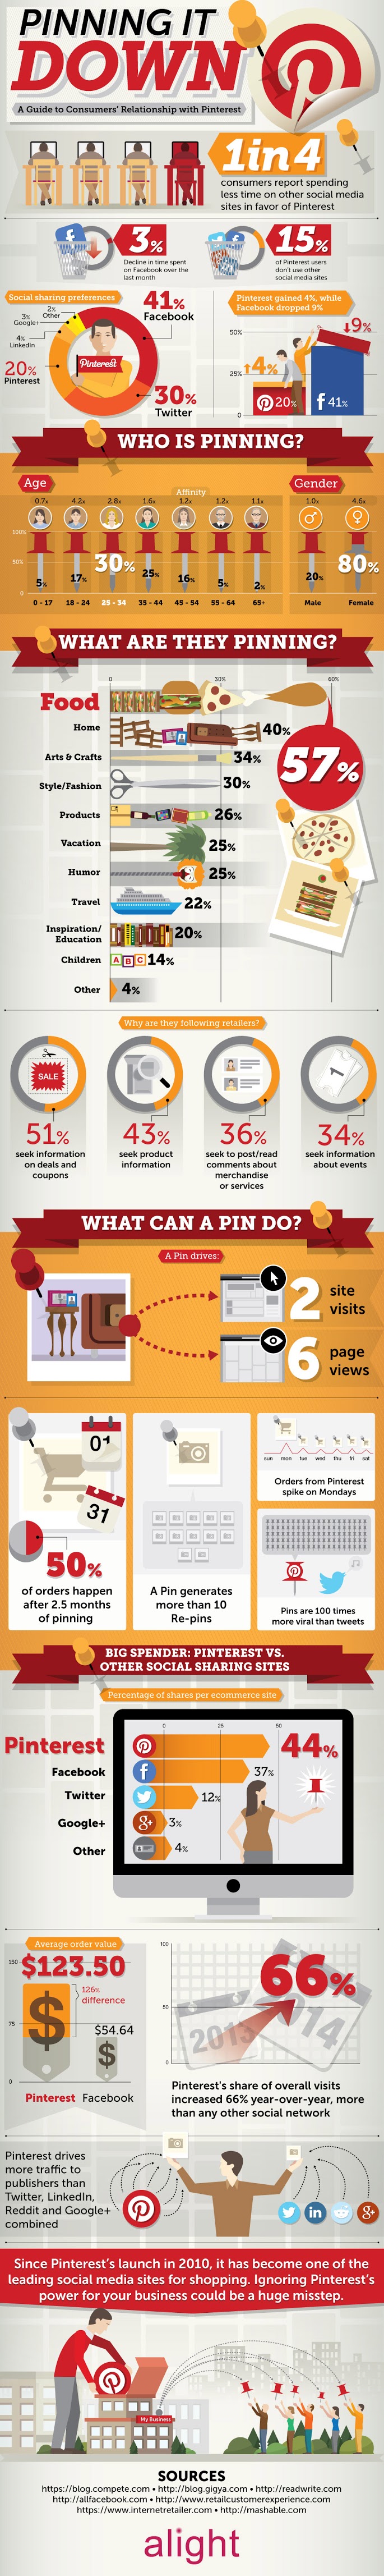 How to incorporate #Pinterest into your business’s #socialmedia presence - #infographic #marketing